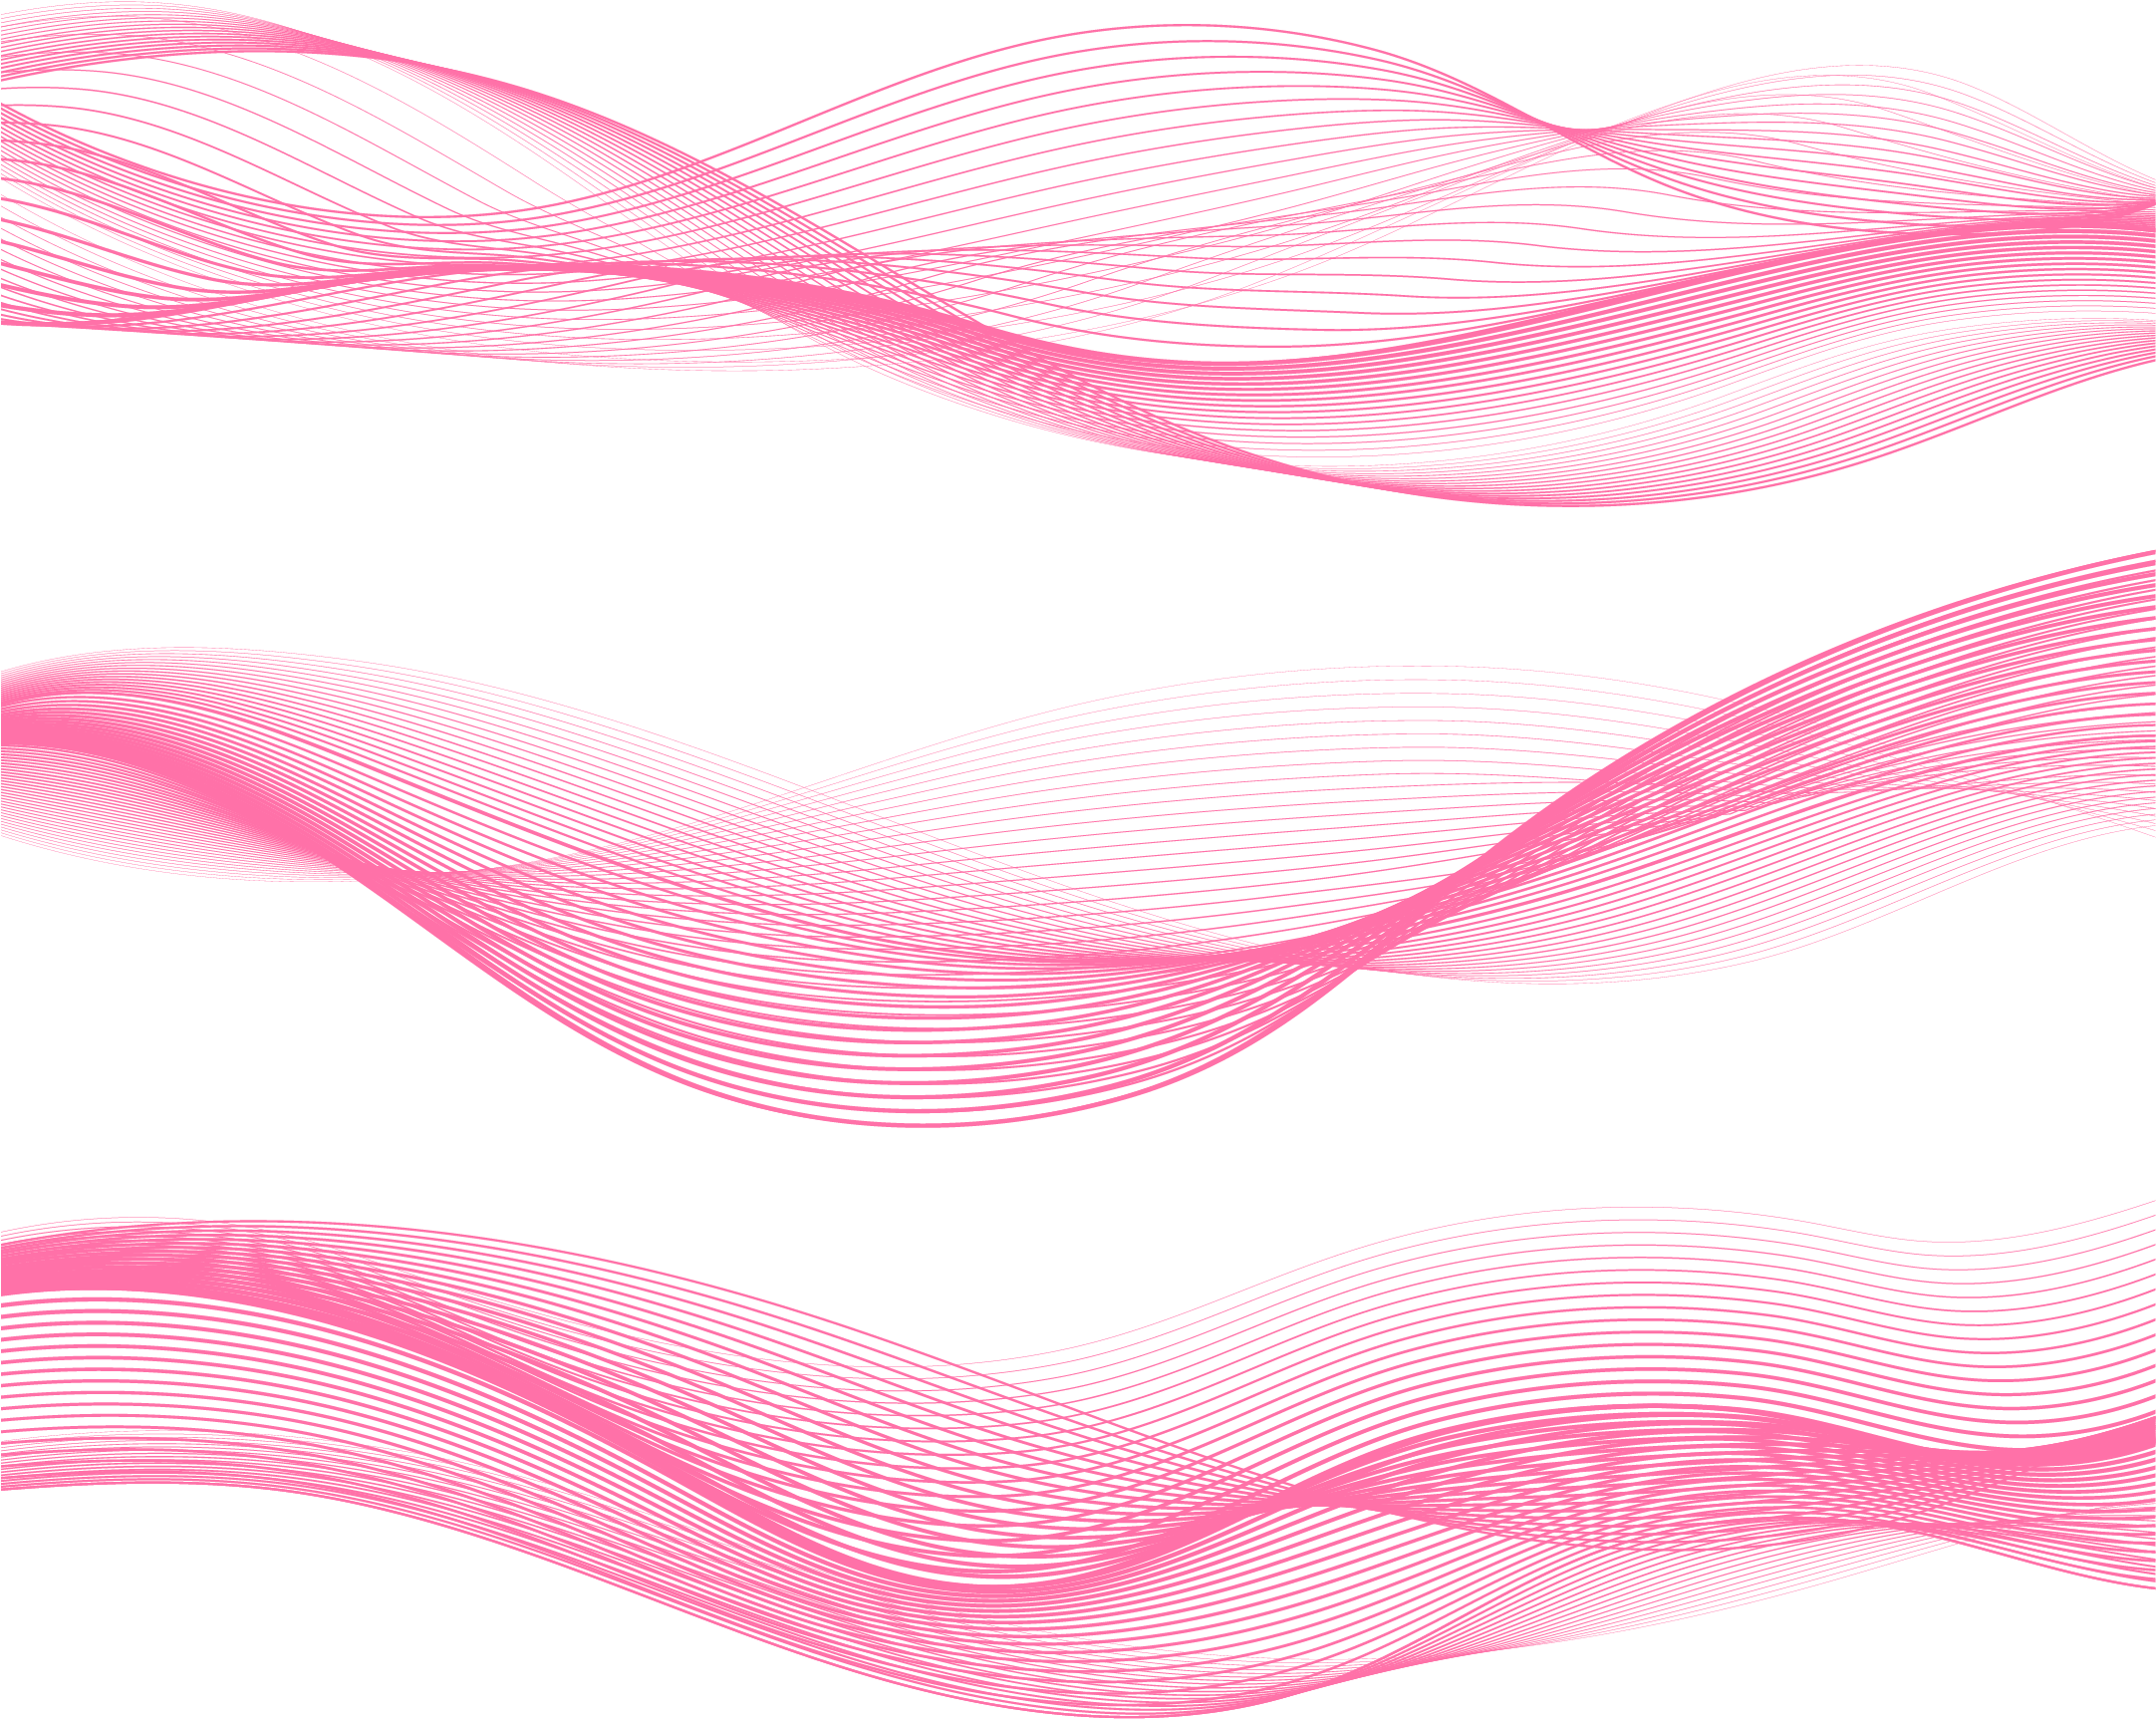 Pink Technology Ripple 2598*1724 Transprent Png Free - Pink Technology Ripple 2598*1724 Transprent Png Free (2598x1724)